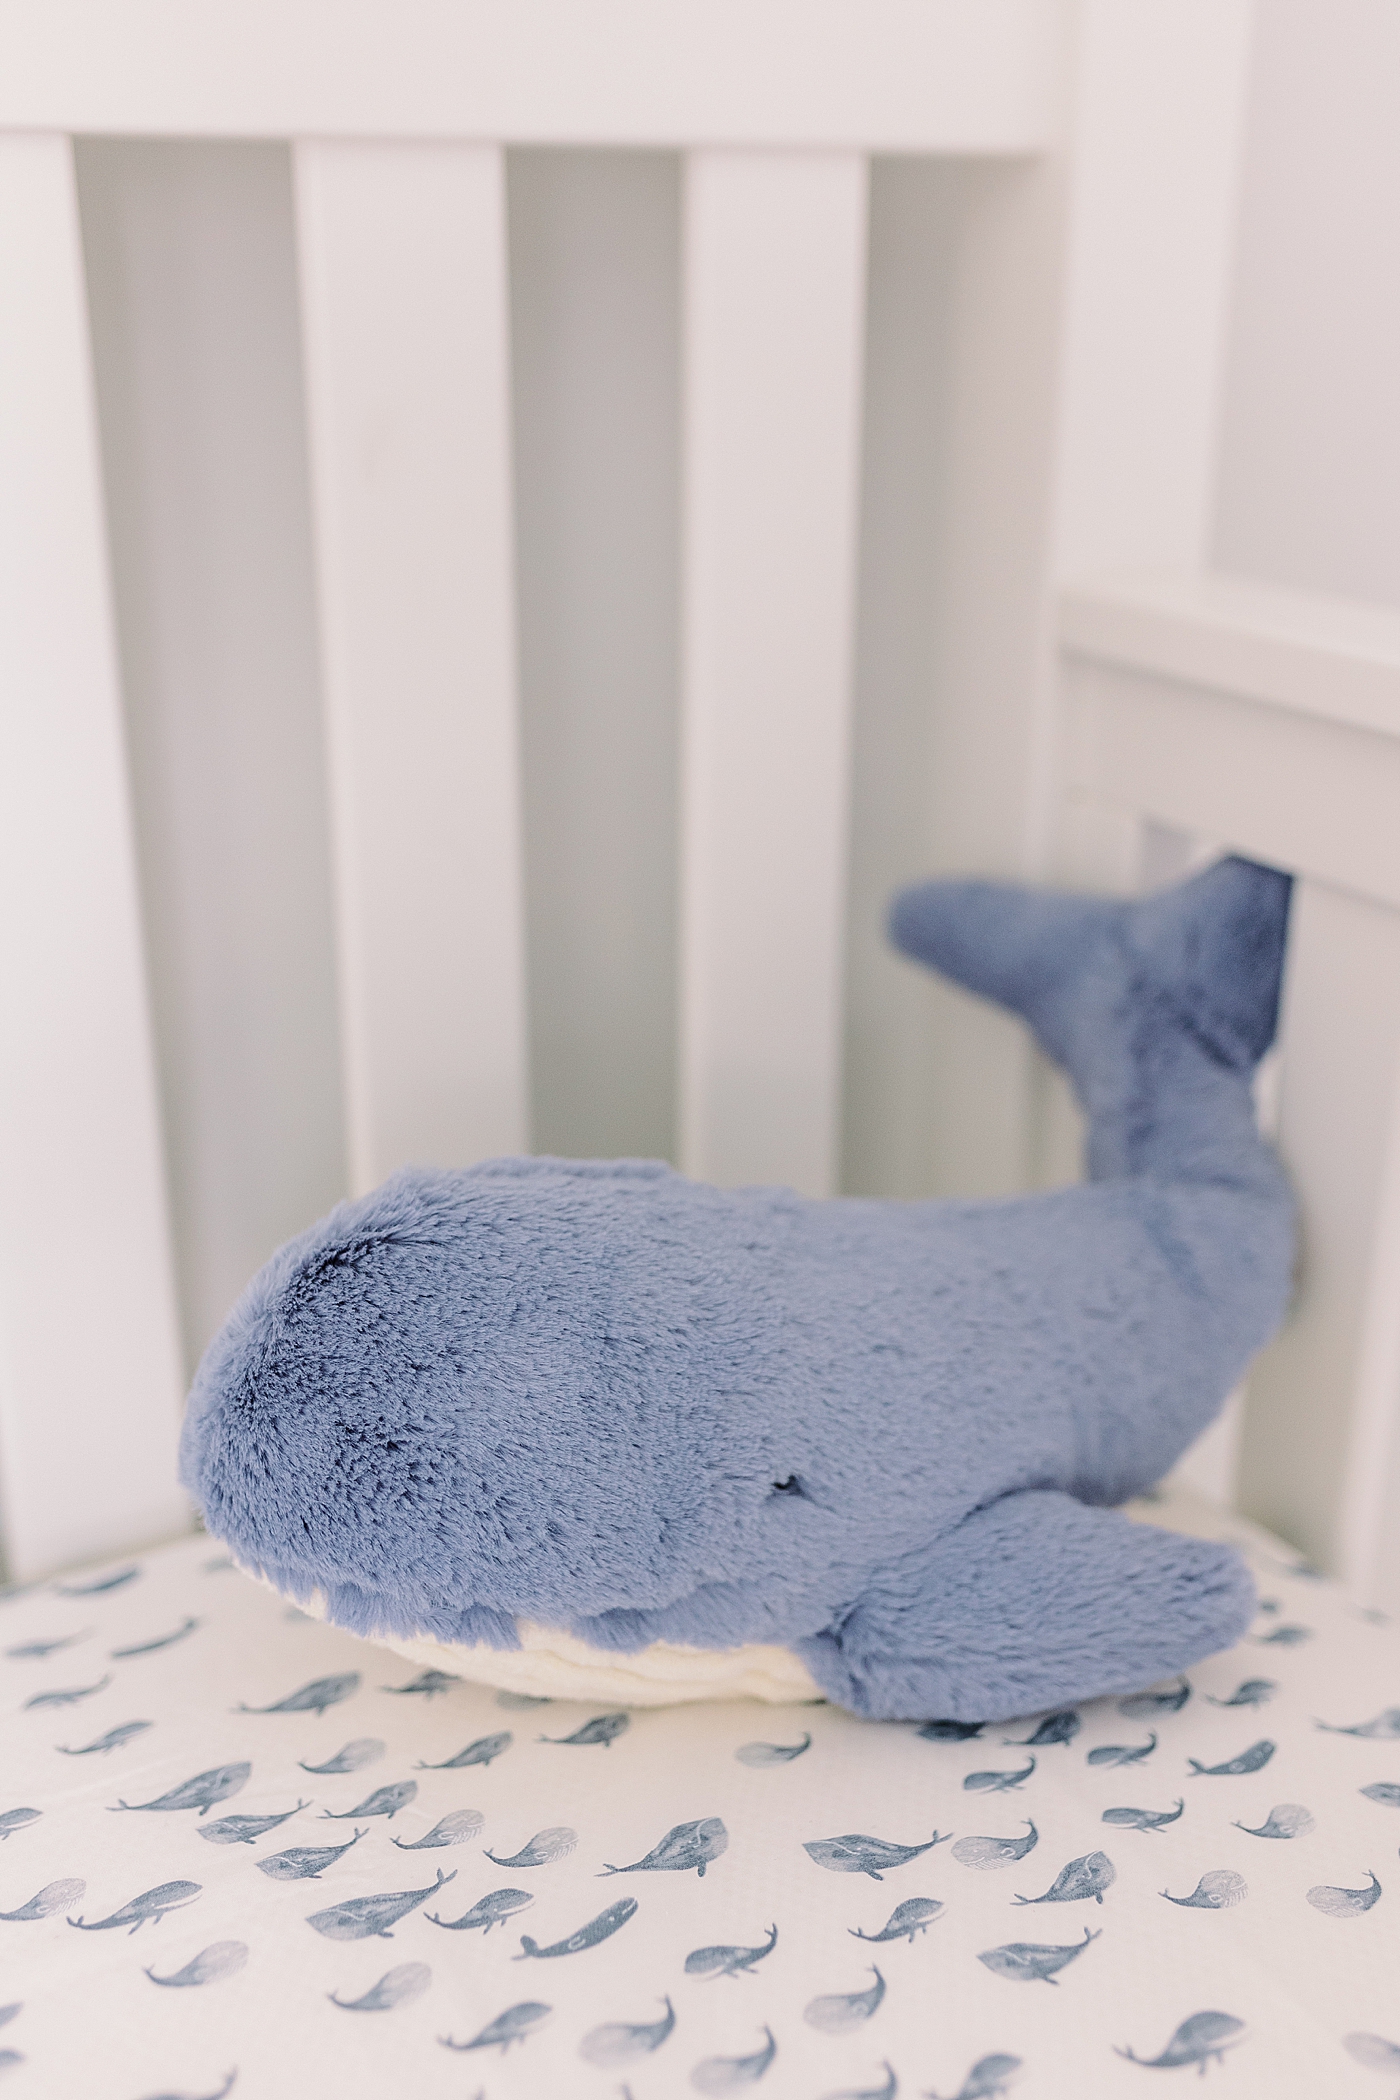 Detail of crib with whale sheets and stuffed whale lovey | Image by Caitlyn Motycka